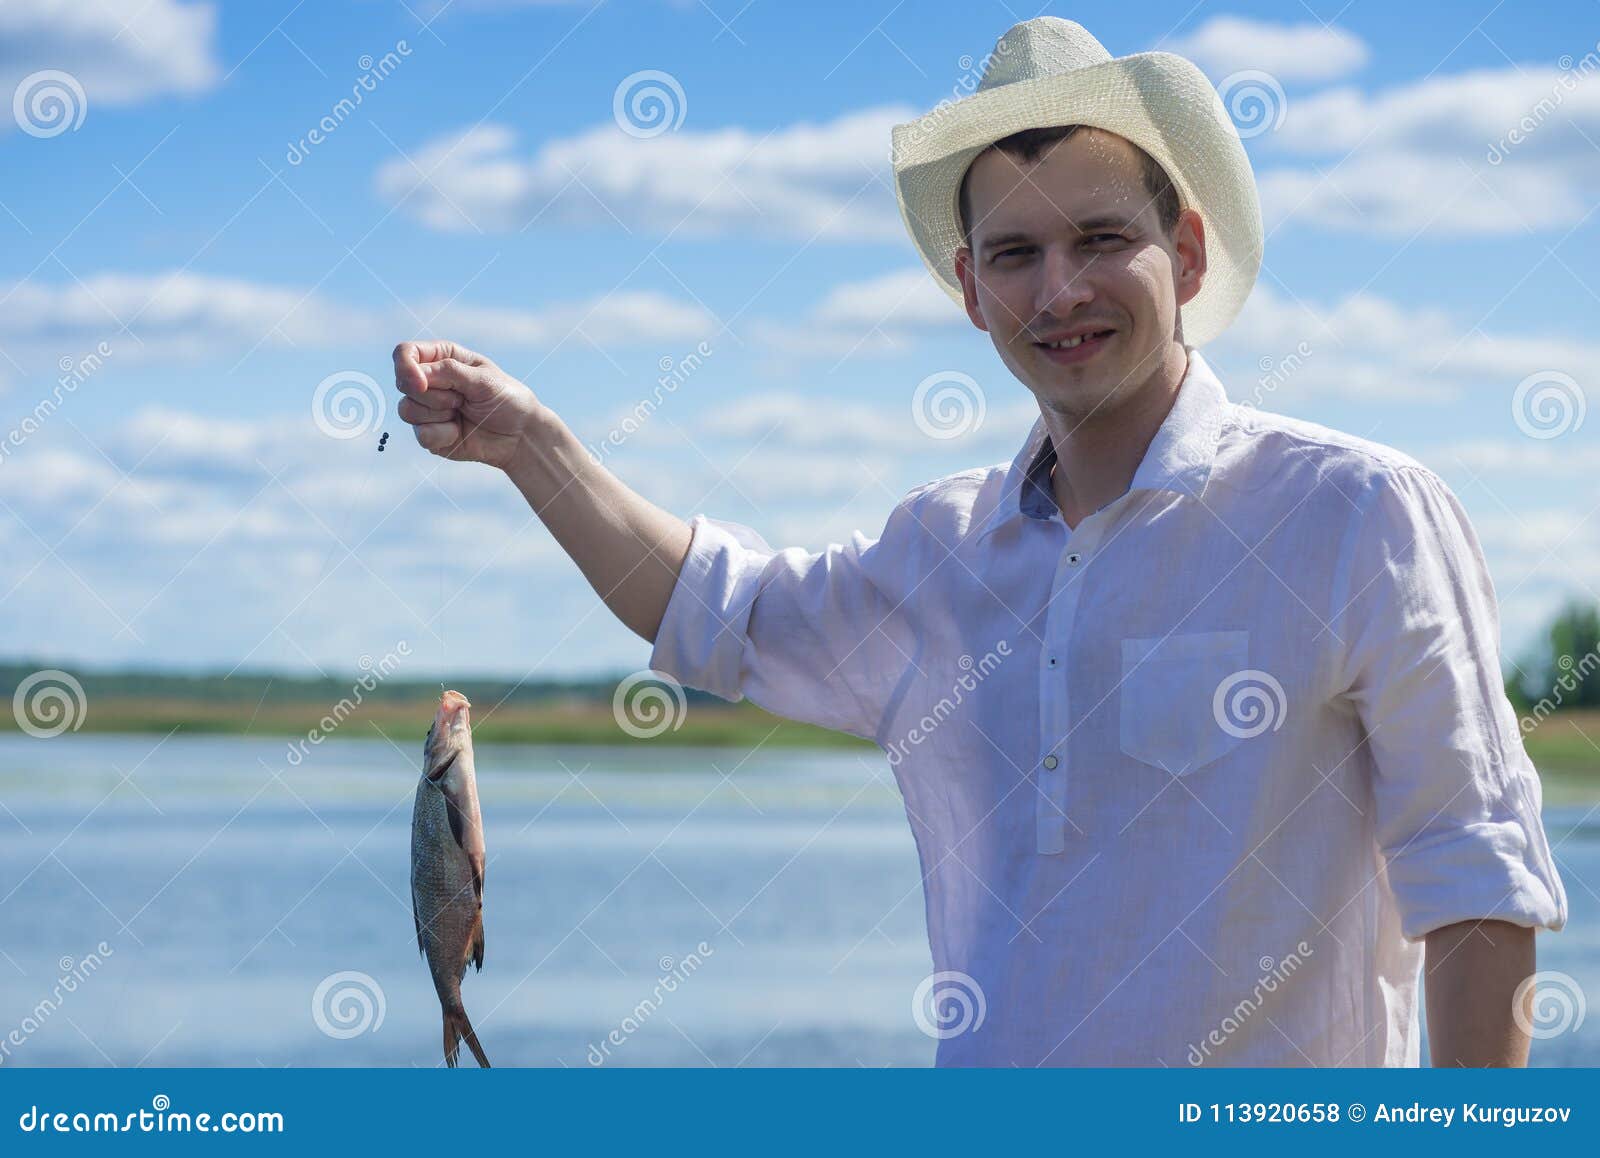 Man on the River in a Cowboy Hat Caught a Fish Stock Photo - Image